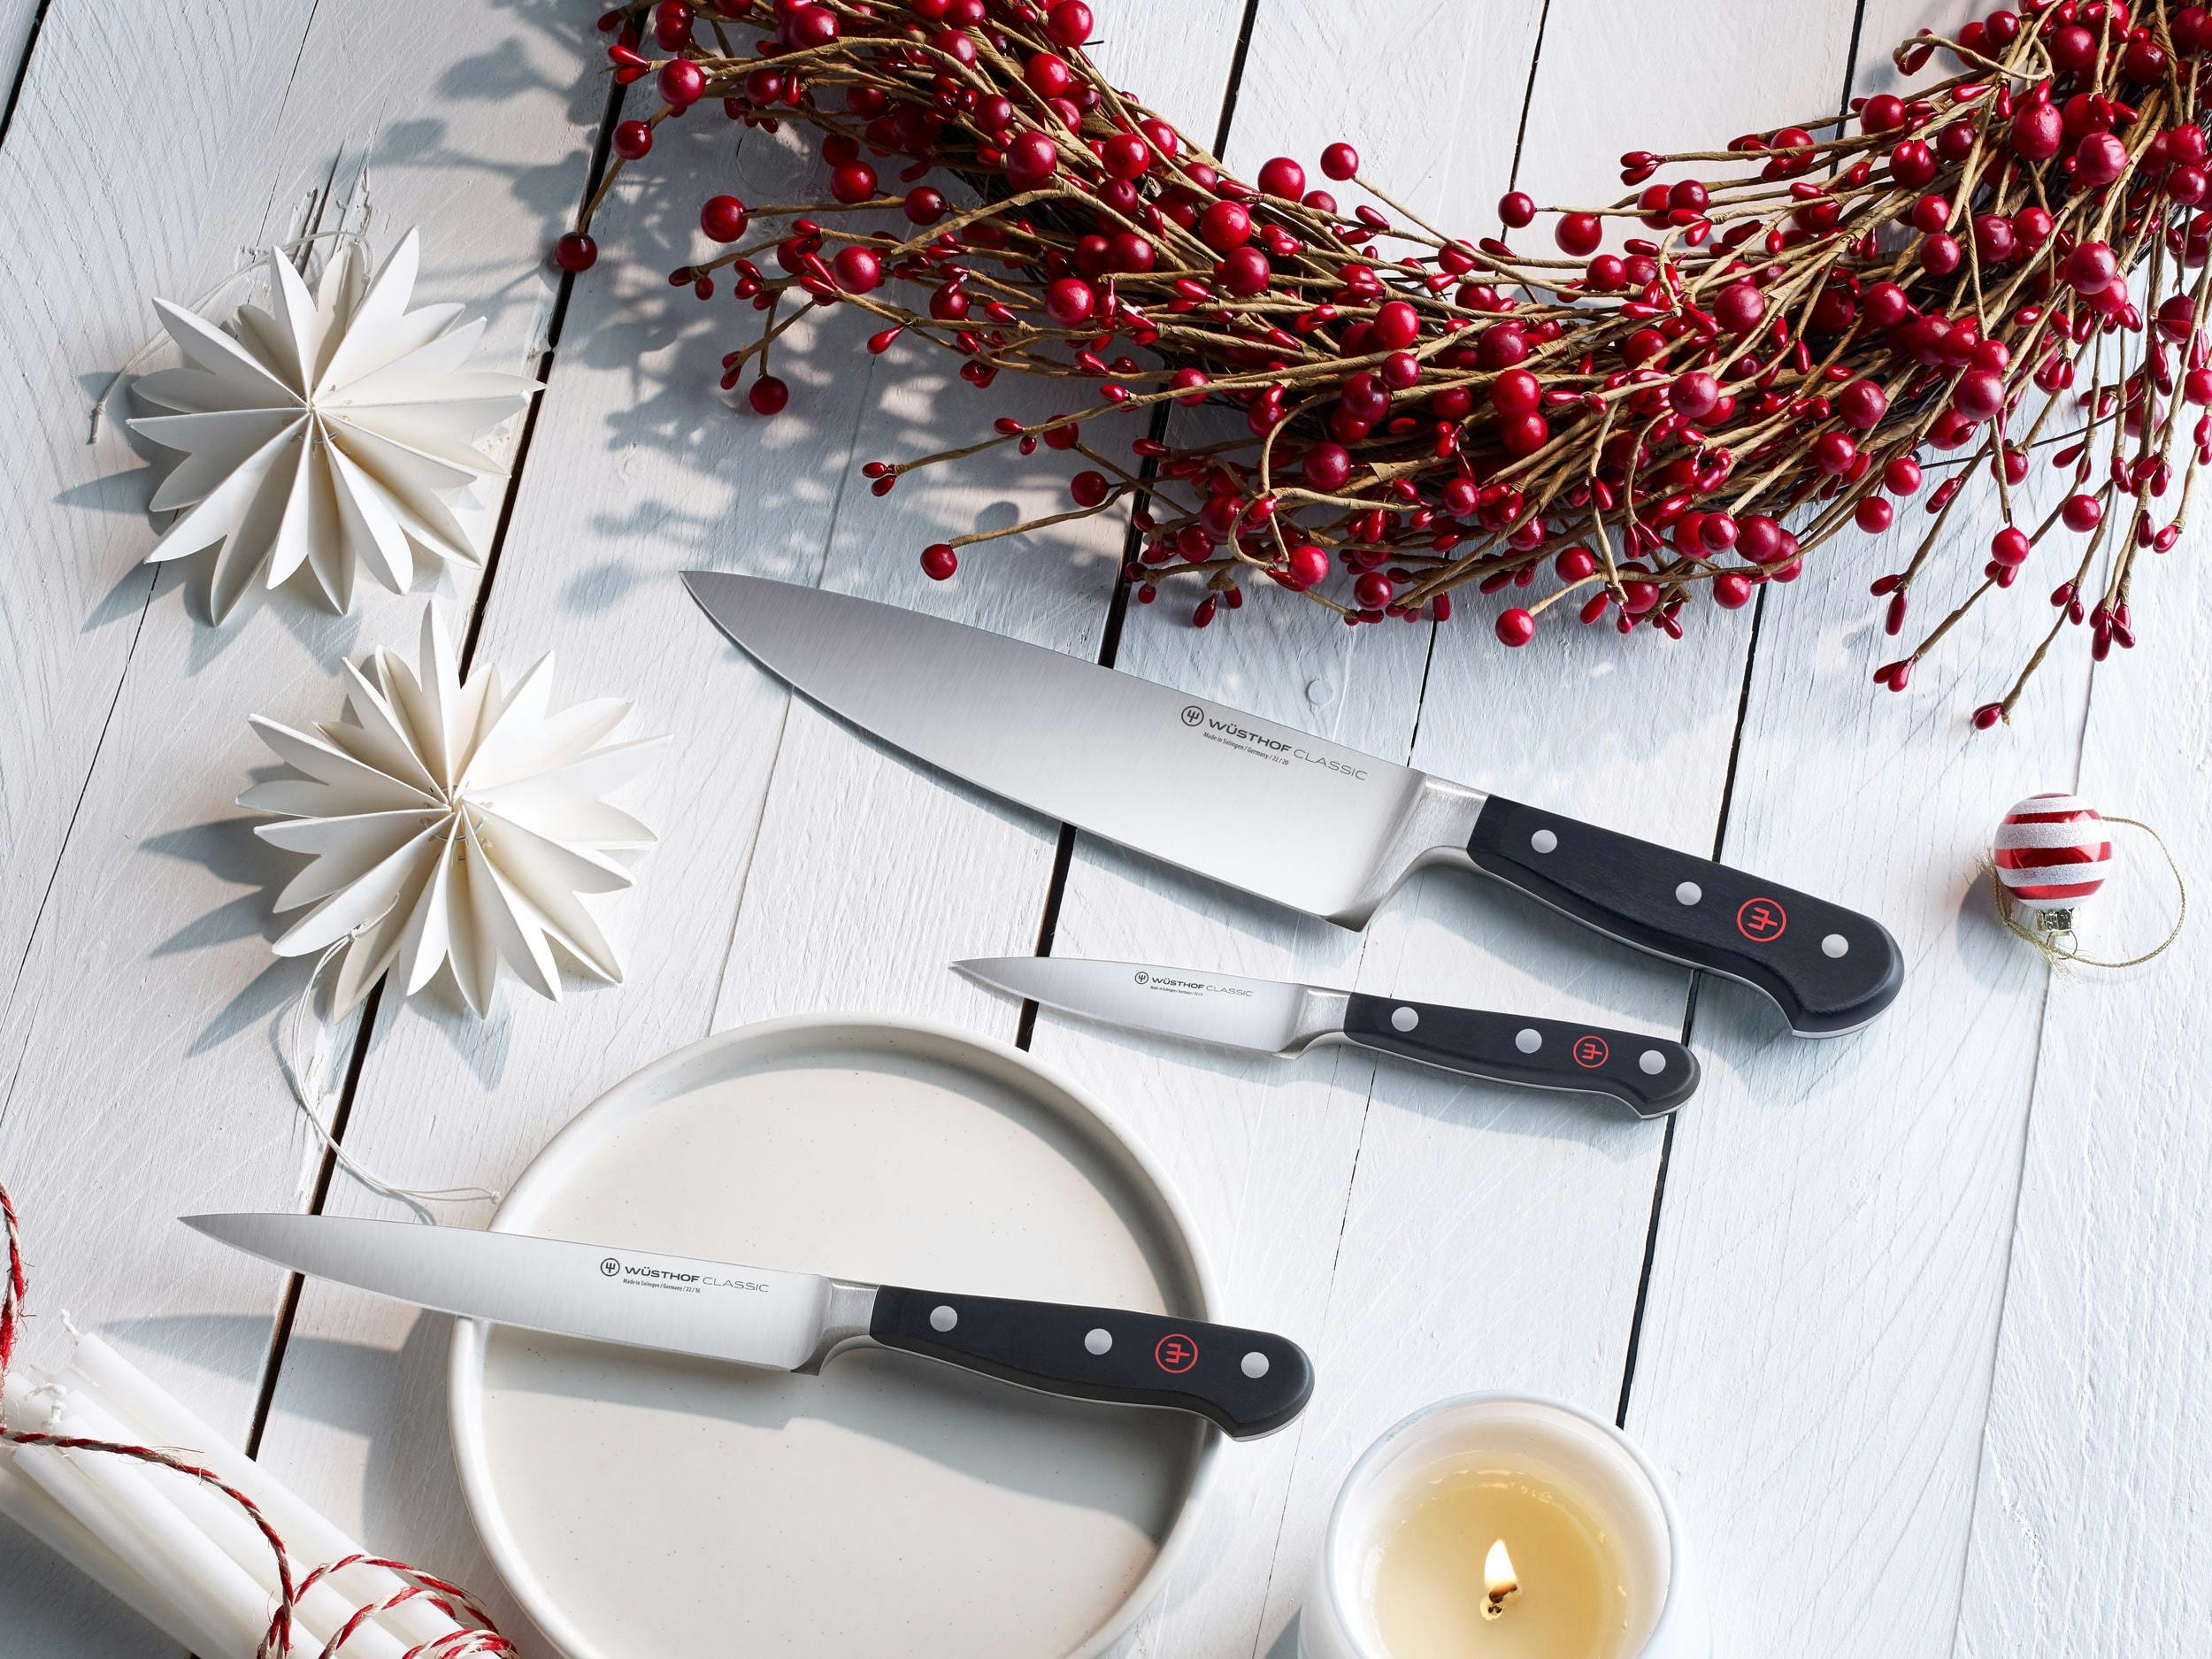 Classic knife set on white wooden table, next to paper snowflakes and holiday wreath